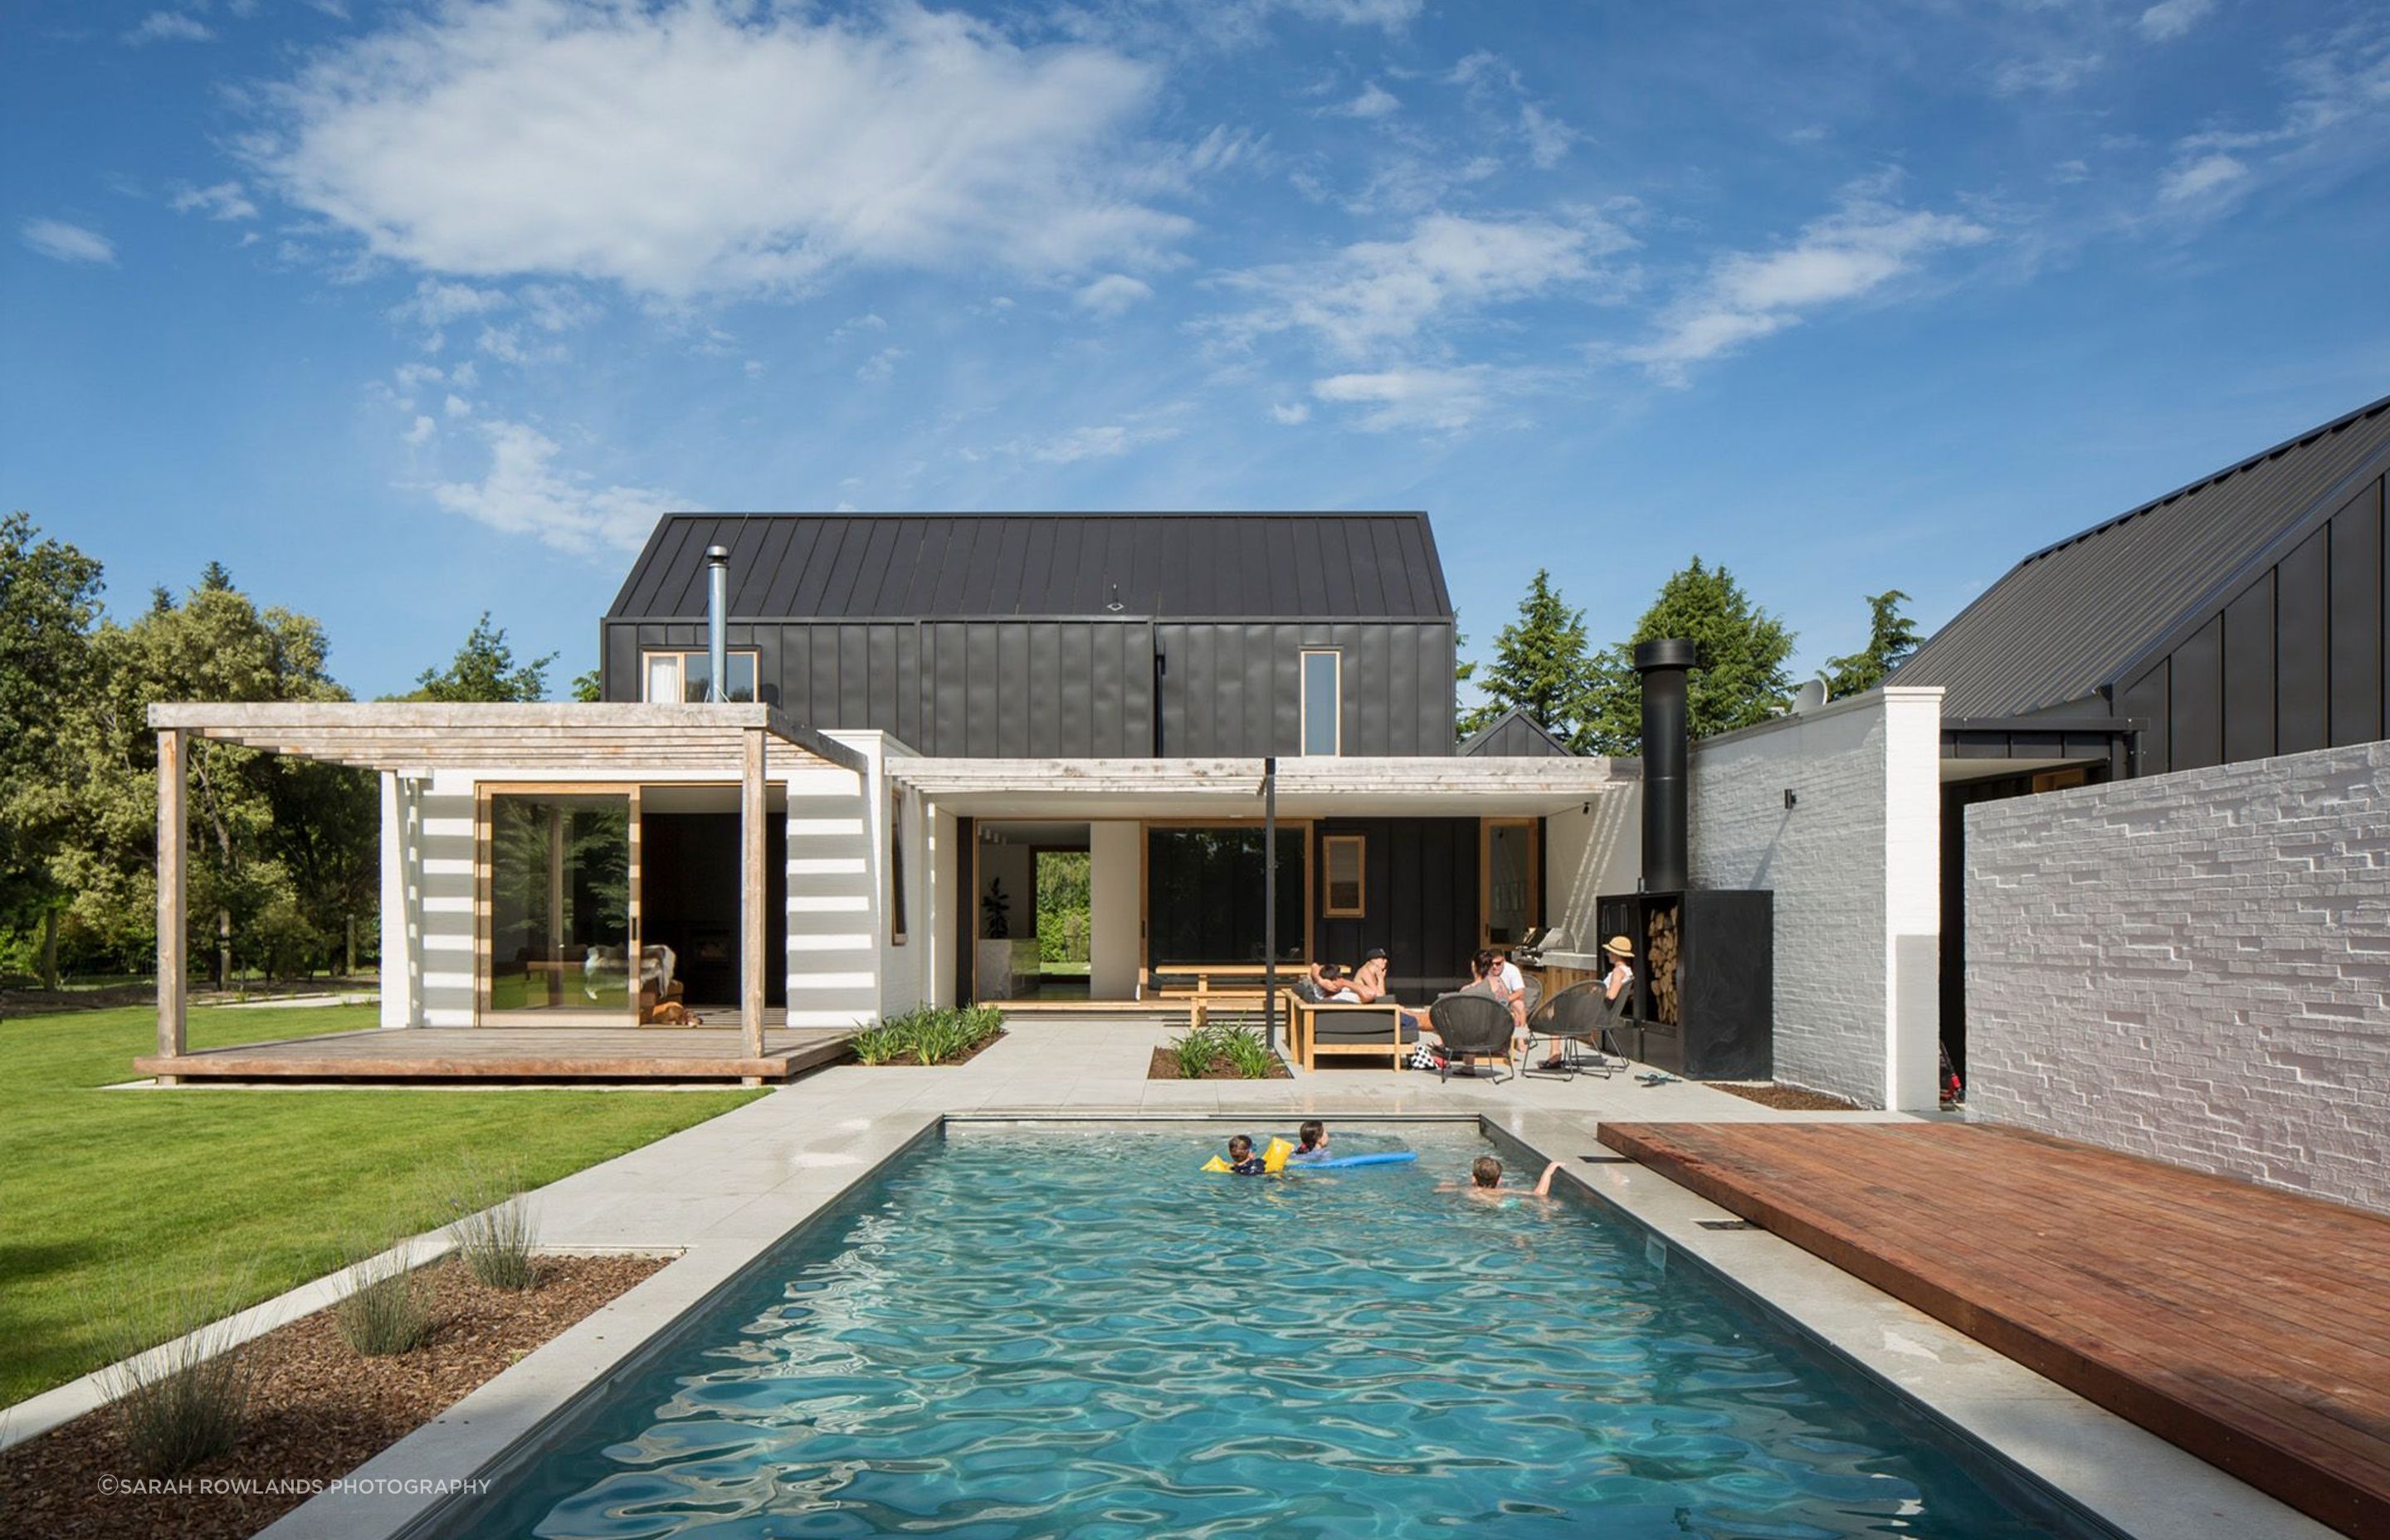 A swimming pool and outdoor entertaining areas are sheltered by a white bagged-brick wall painted in Dulux 'Dannevirke' to match the rest of the house.